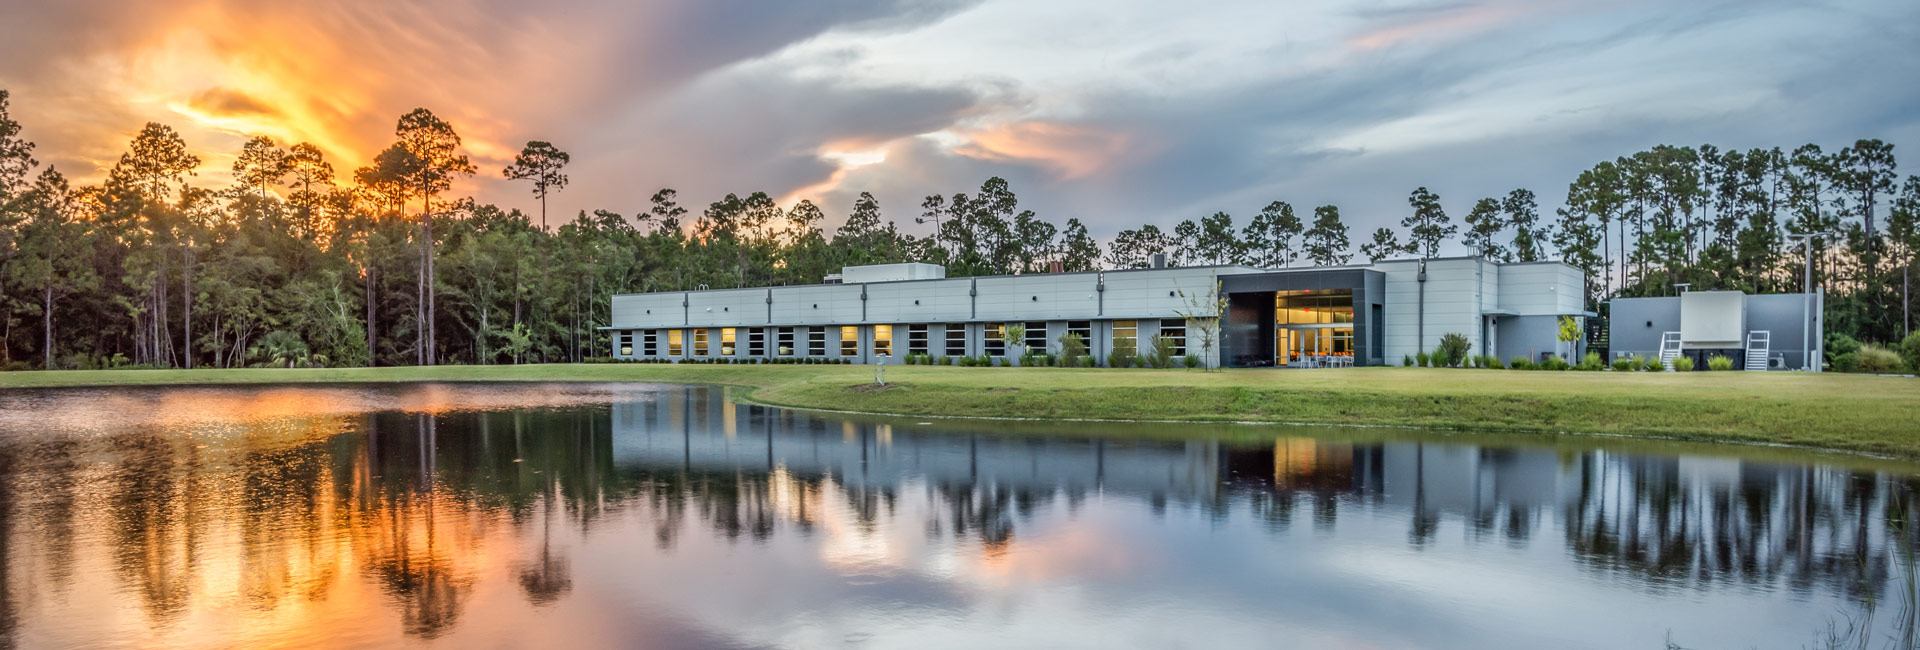 Florida Department of Agriculture and Consumer Services Bronson Animal Disease Diagnostic Laboratory